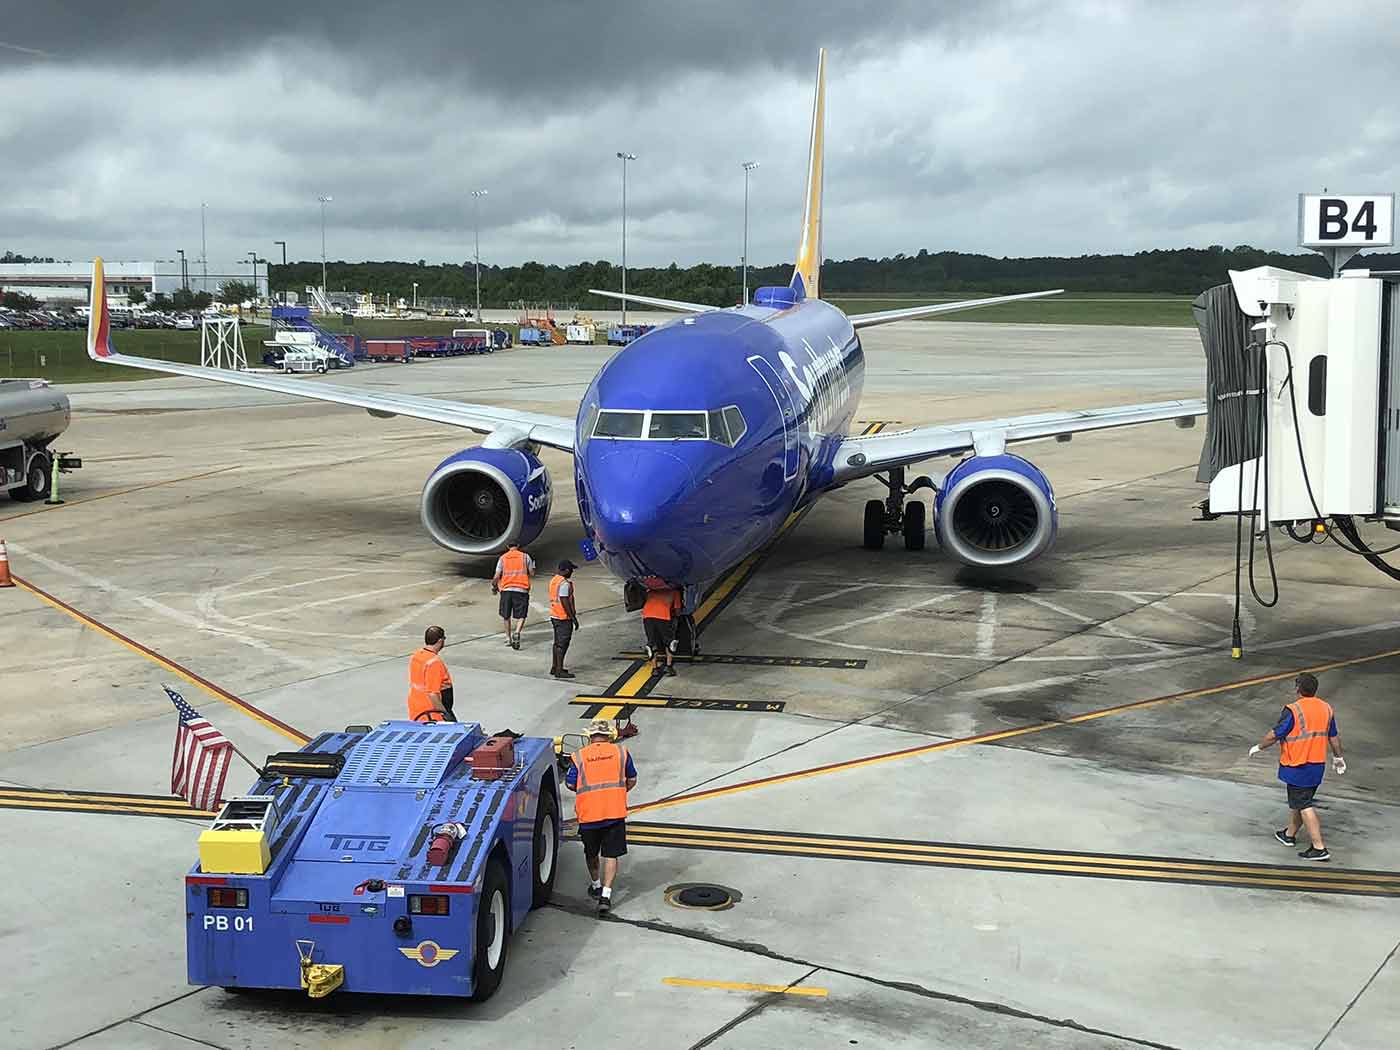 Southwest Airlines aircraft in Charleston, SC. Photo by Steven Sande